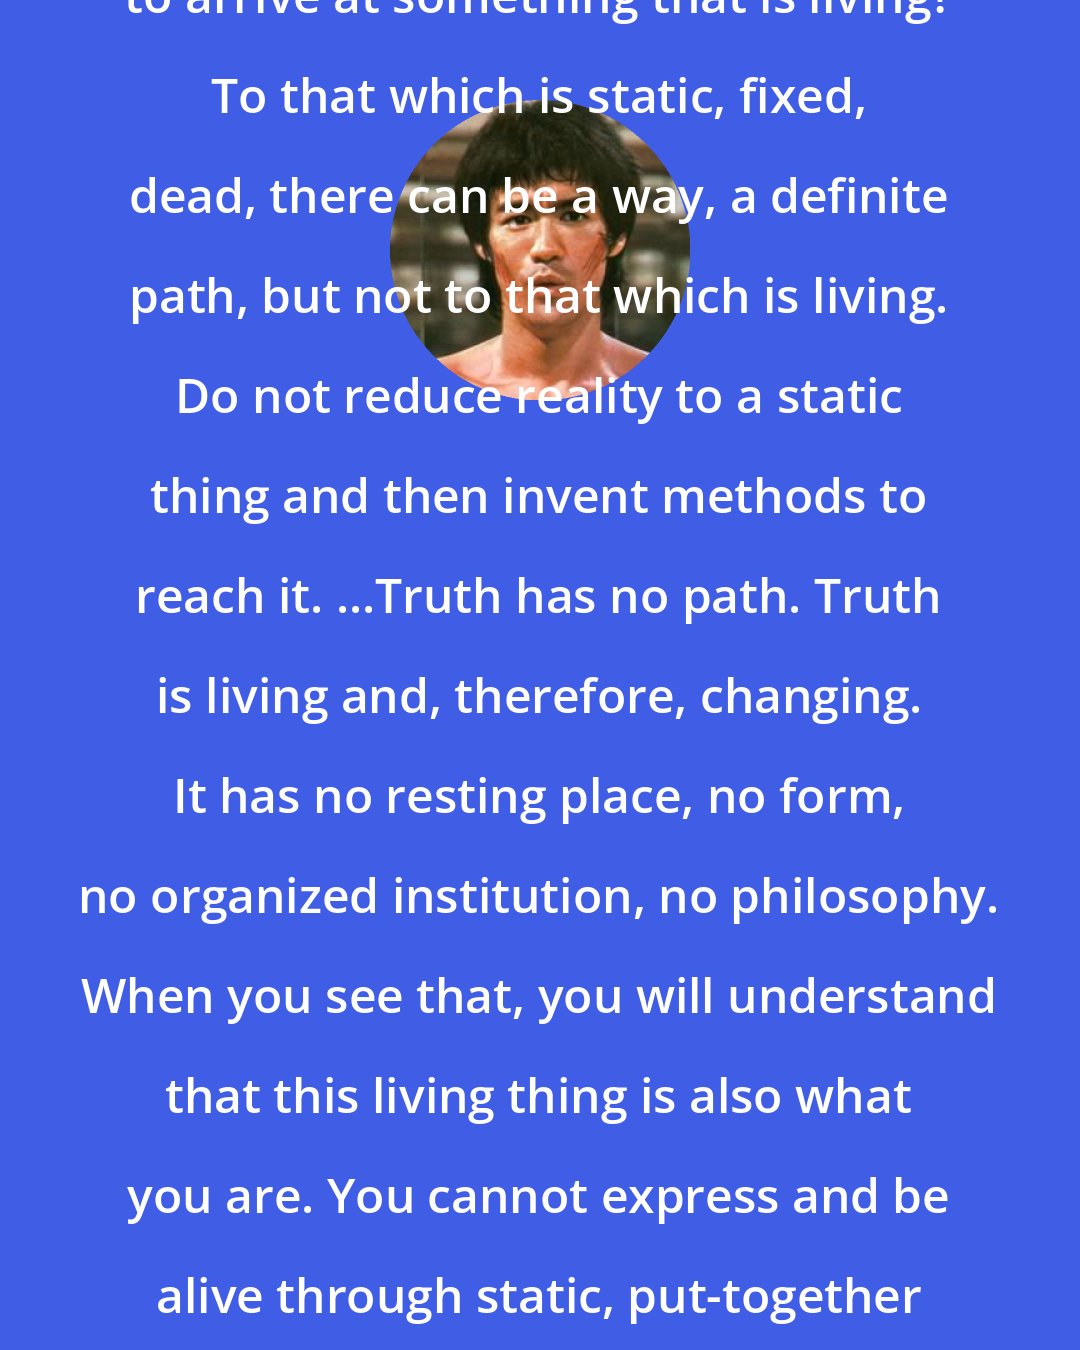 Bruce Lee: How can there be methods and systems to arrive at something that is living? To that which is static, fixed, dead, there can be a way, a definite path, but not to that which is living. Do not reduce reality to a static thing and then invent methods to reach it. ...Truth has no path. Truth is living and, therefore, changing. It has no resting place, no form, no organized institution, no philosophy. When you see that, you will understand that this living thing is also what you are. You cannot express and be alive through static, put-together form, through stylized movement.